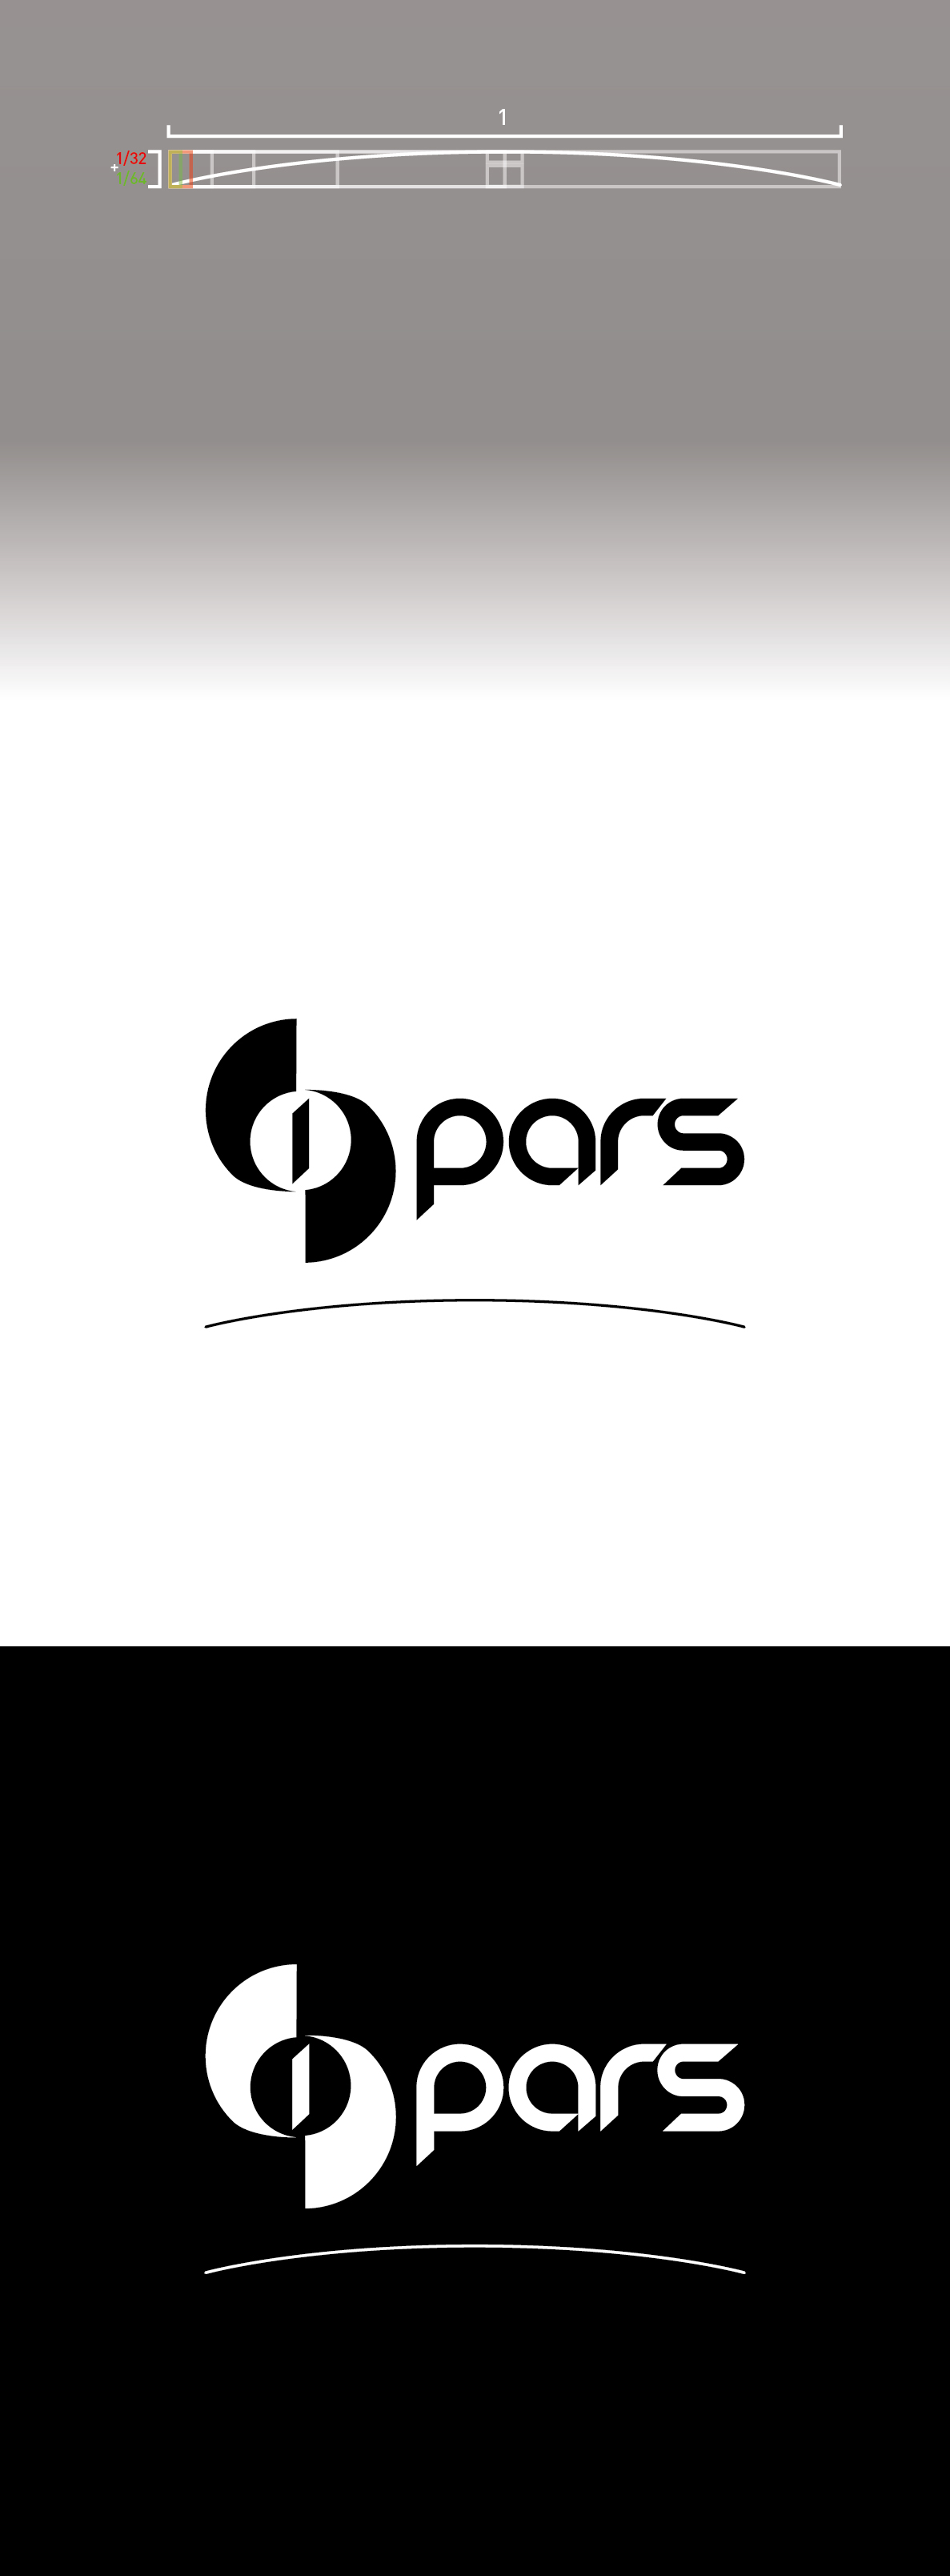 pars Iran Startup Italy business logo companyprofile